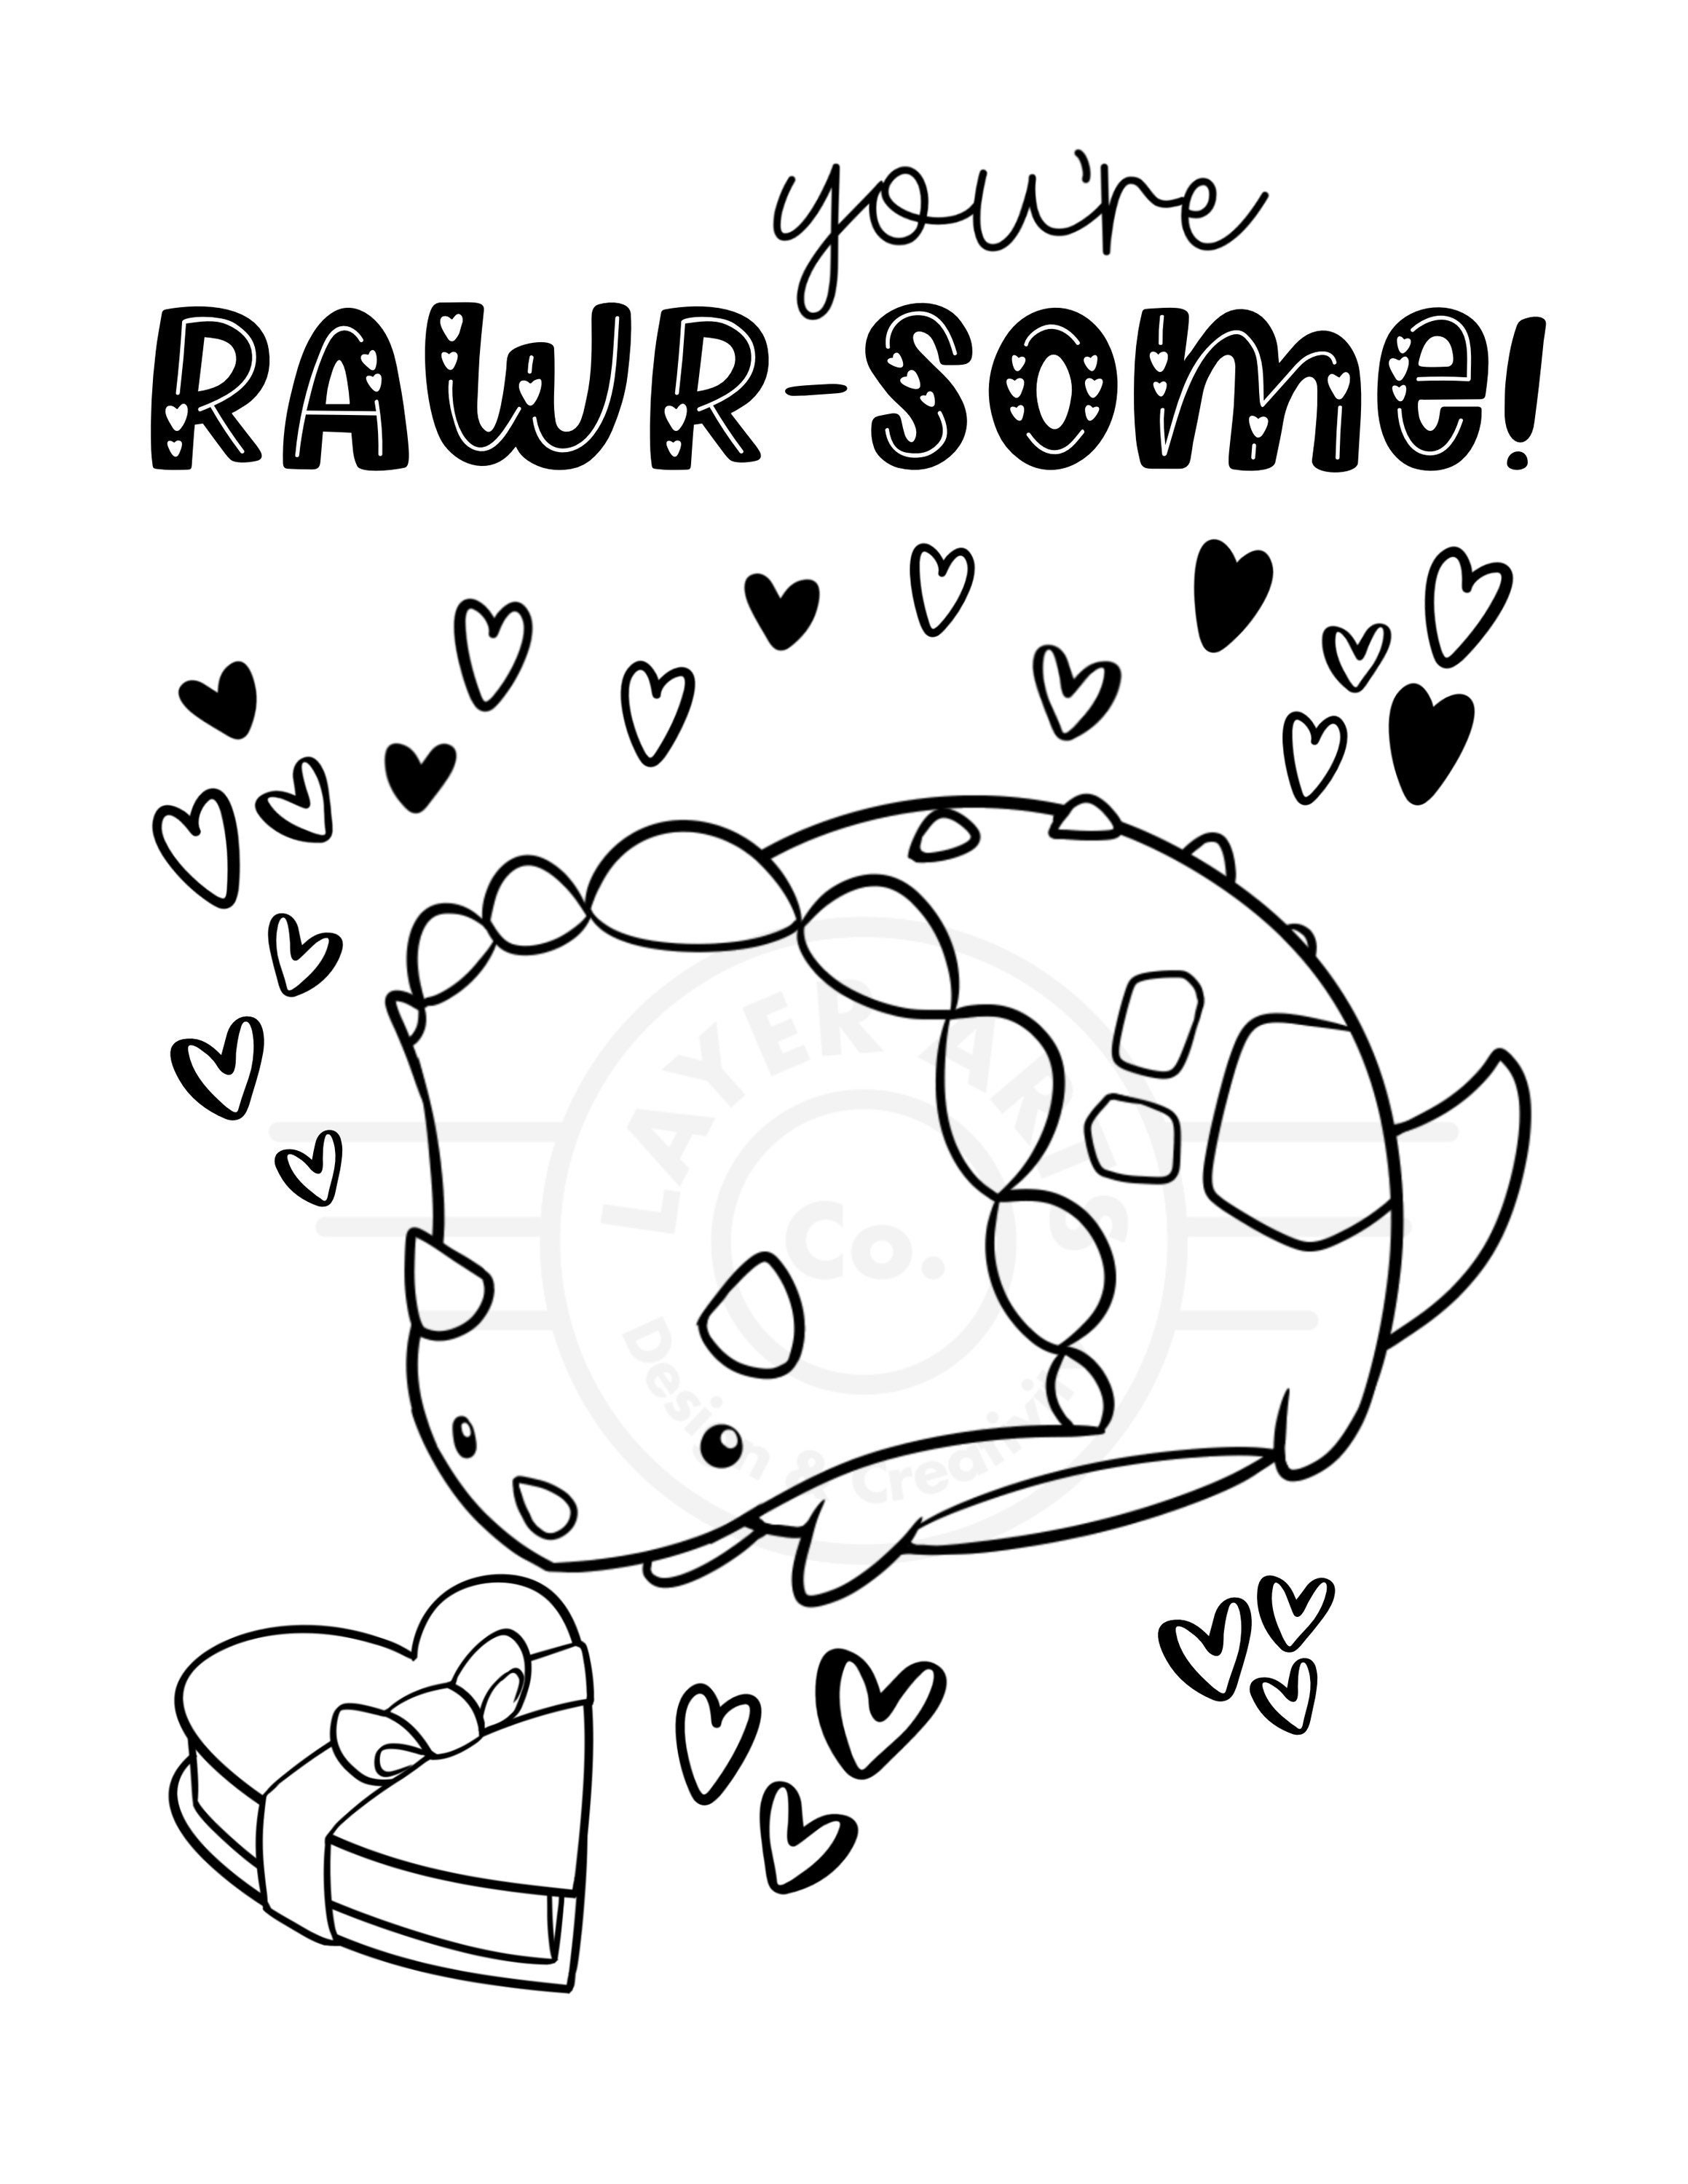 6 Dinosaur Valentine Coloring Pages | Etsy